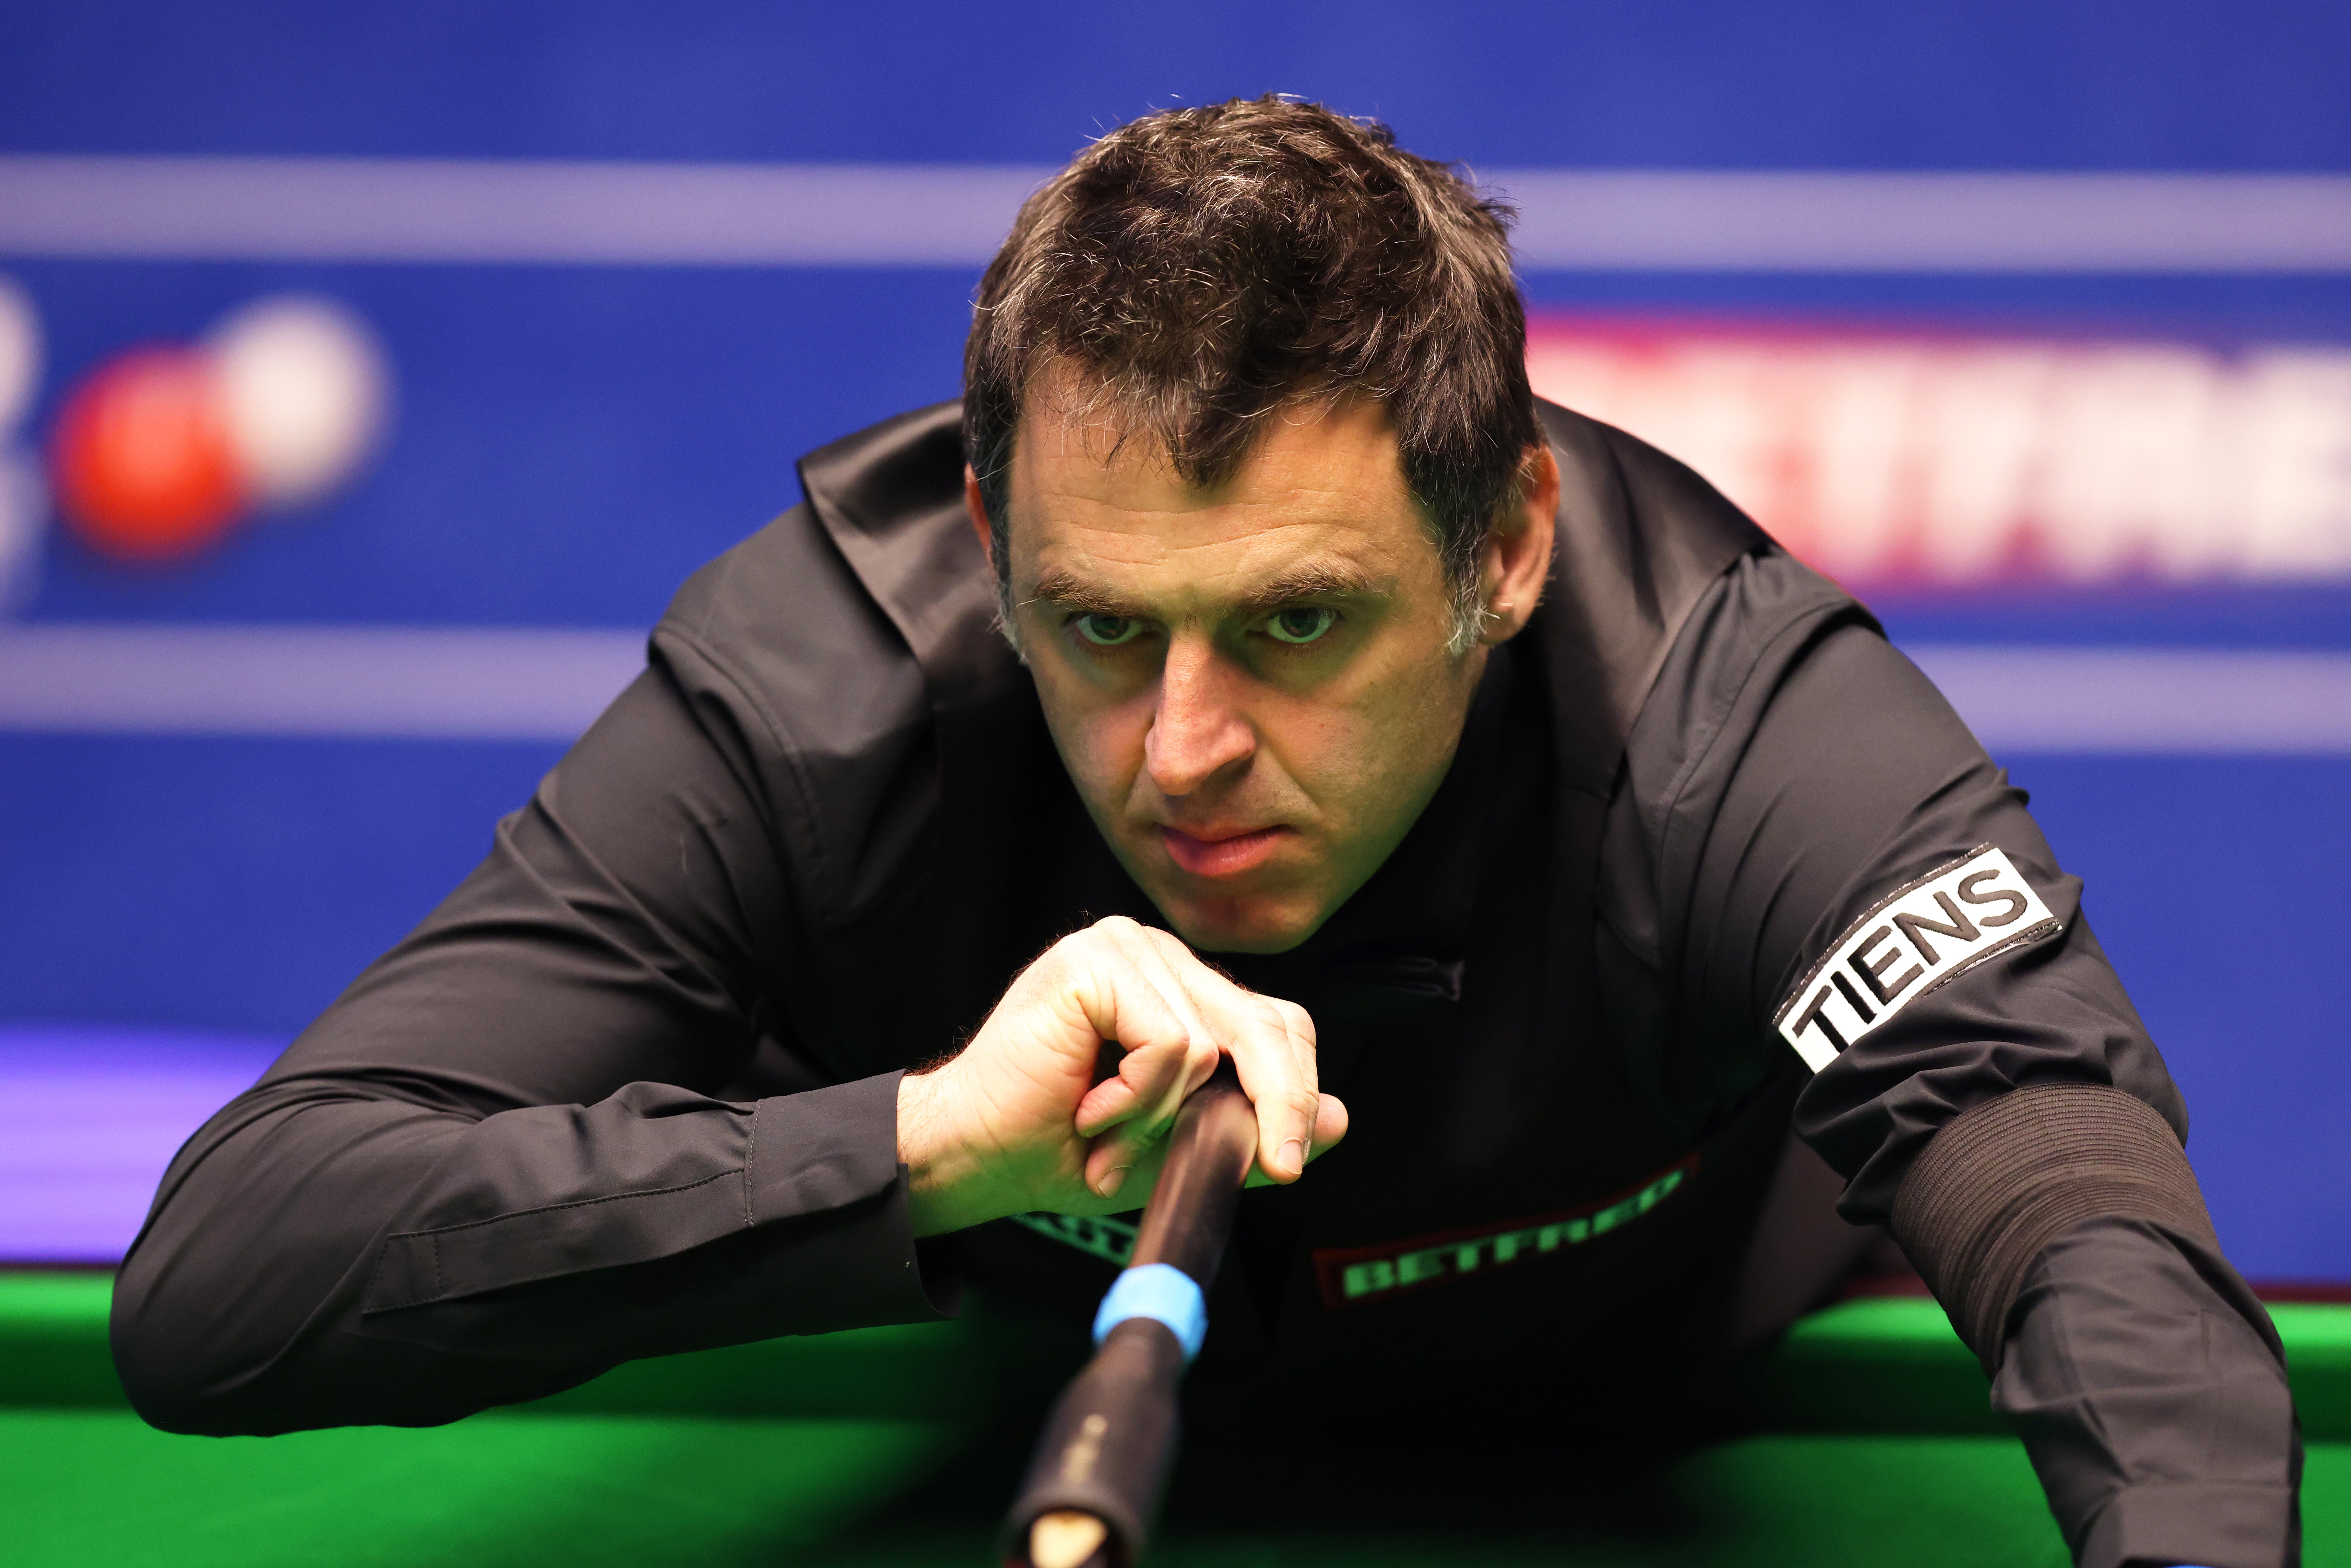 Ronnie OSullivan fears for health after encounter with boozed up geezer at World Snooker Championship The Independent